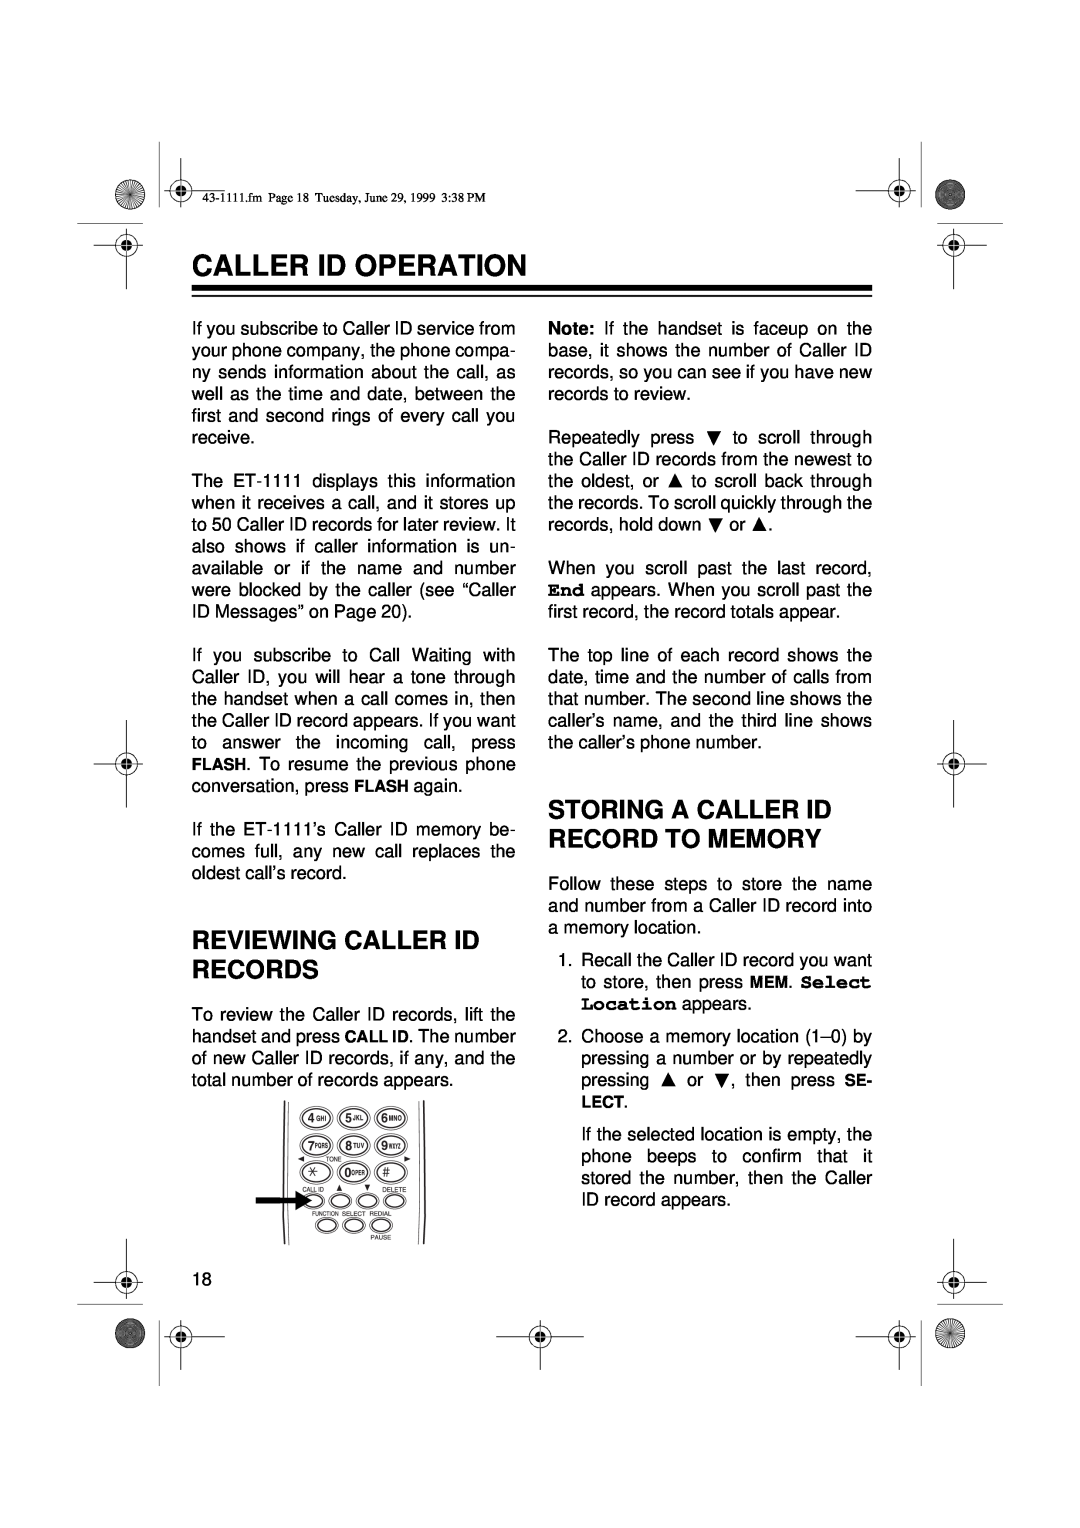 Radio Shack ET-1111 owner manual Caller Id Operation, Reviewing Caller Id Records, Storing A Caller Id Record To Memory 